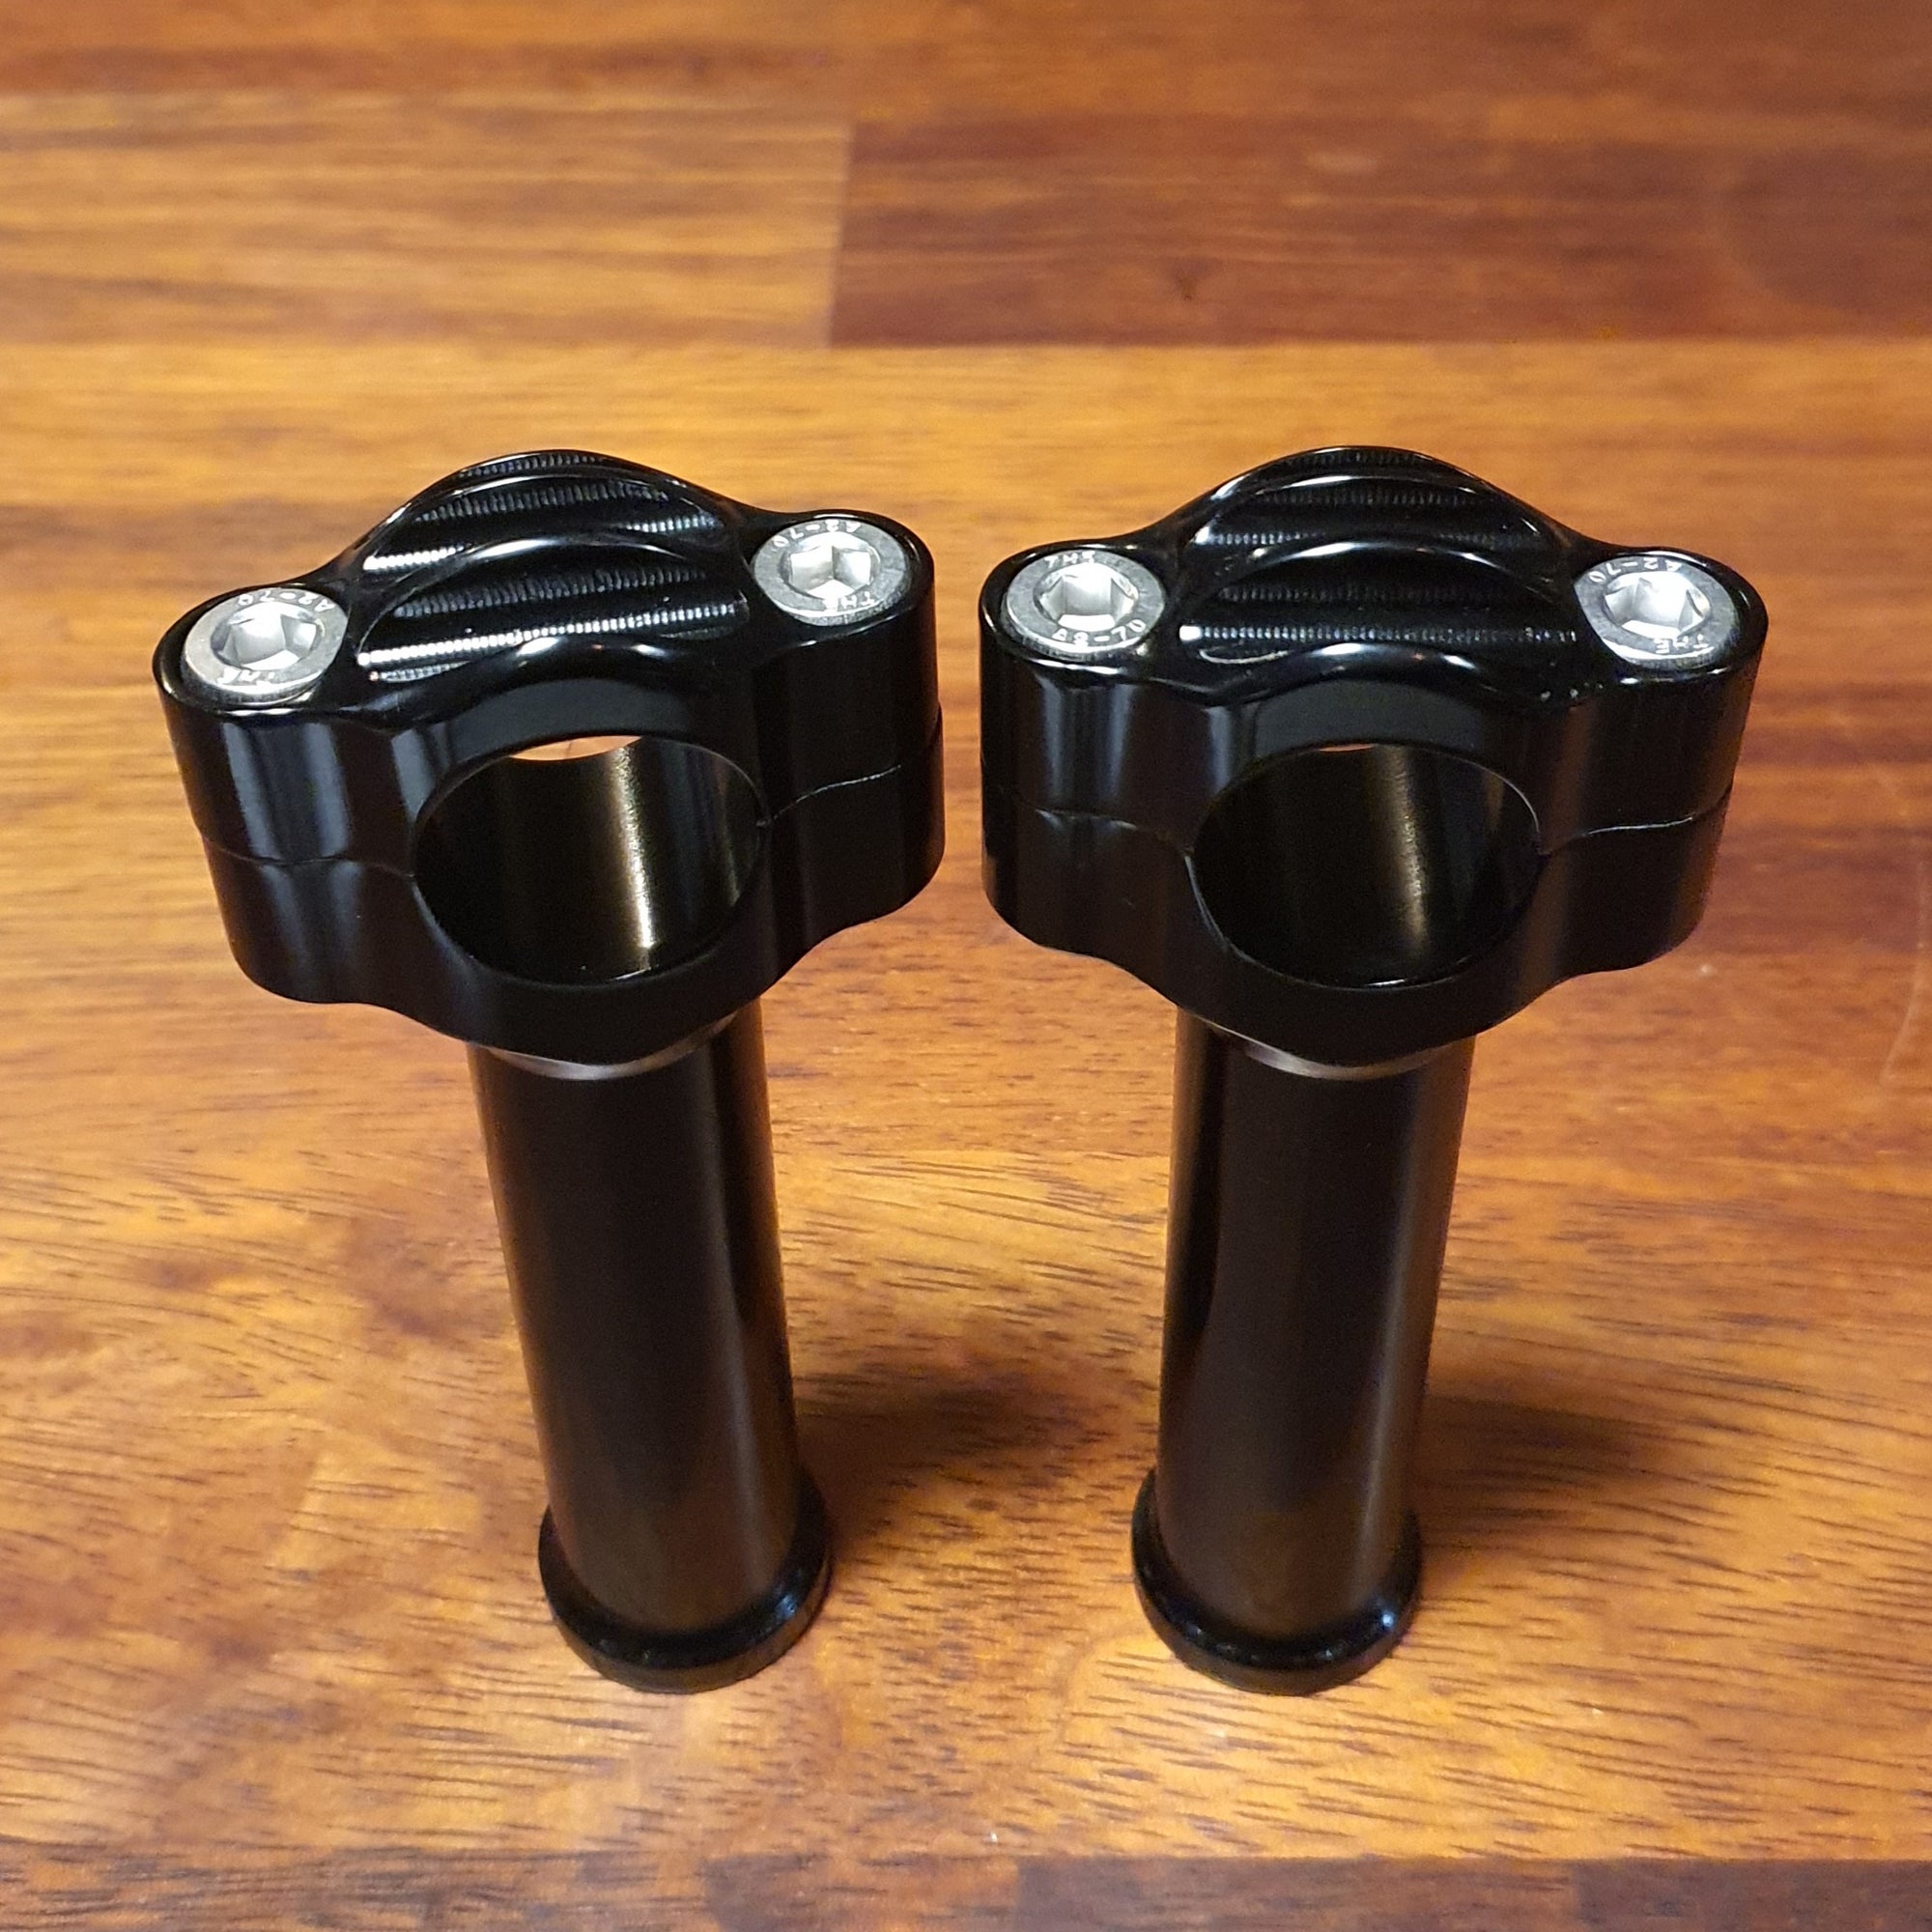 3.5" Anodized risers for 1" bars